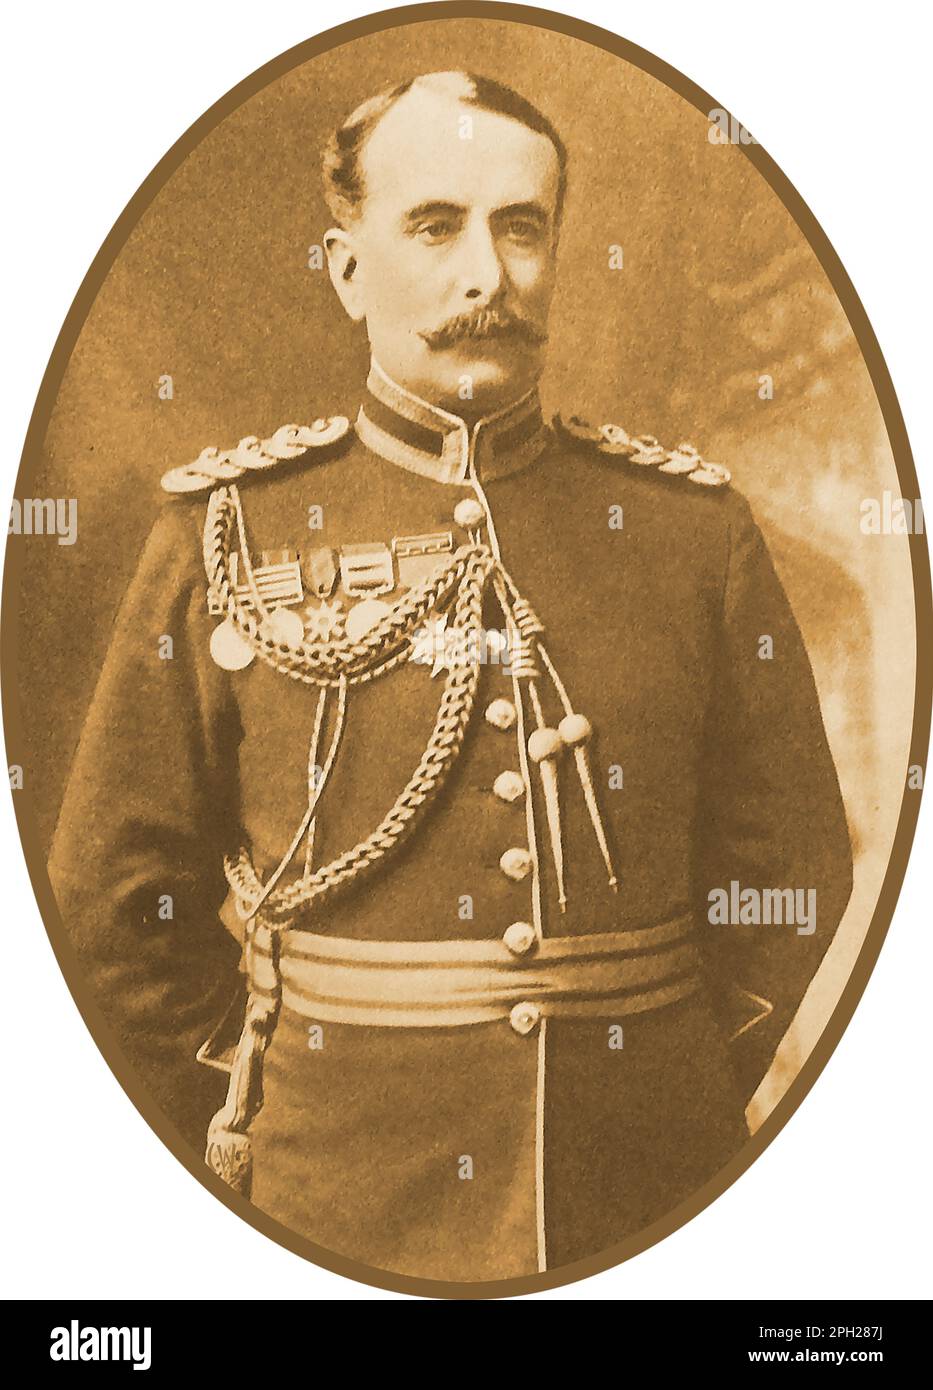 A WWI portrait of British Major-General Charles St Leger Barter. (1857-1931) Stock Photo